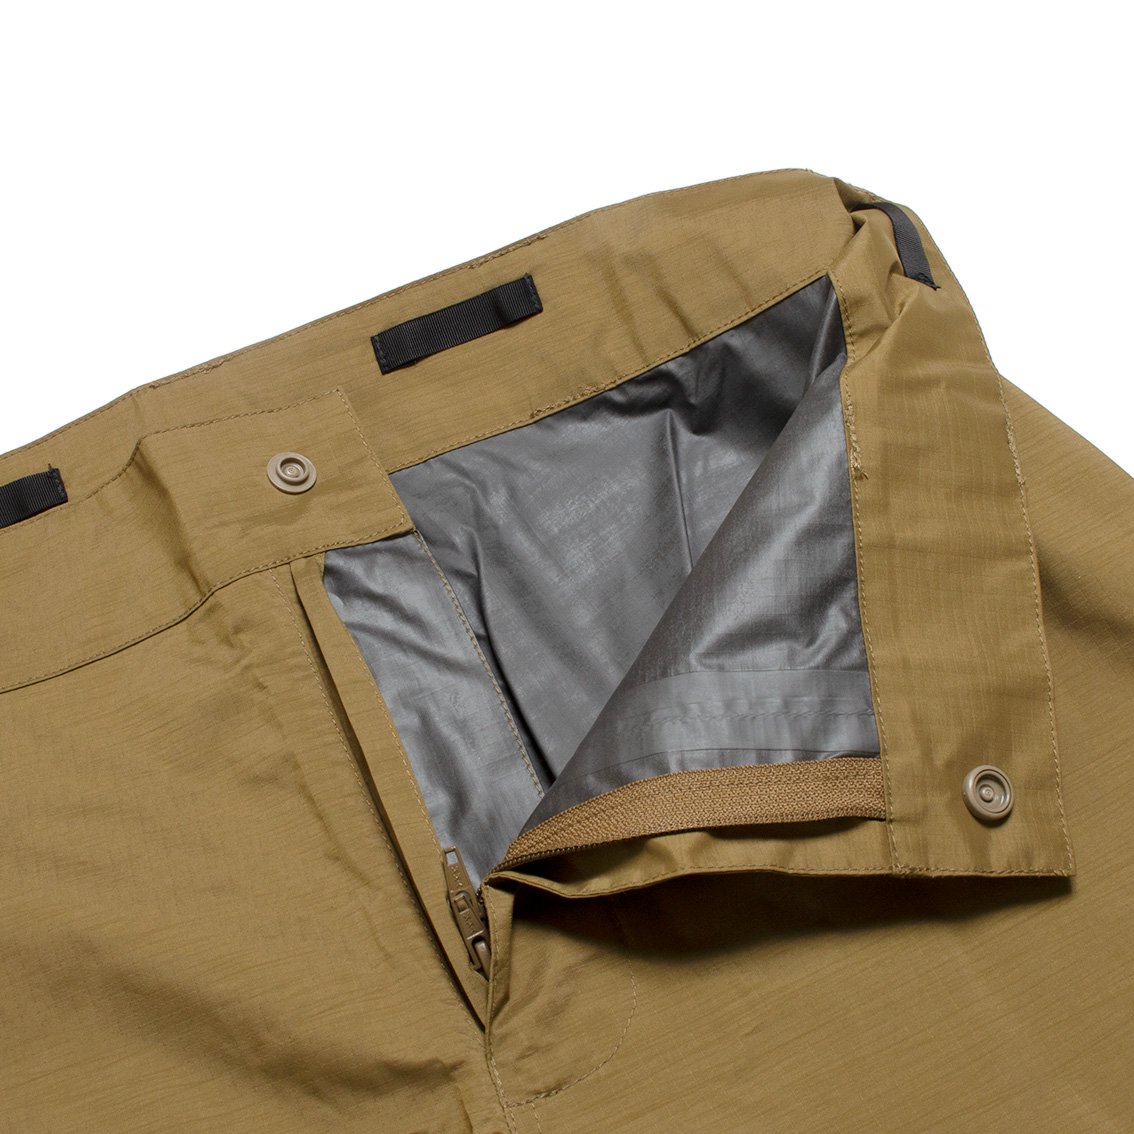 BEYOND CLOTHING / ビヨンドクロージング]PCU L6 GORE-TEX PANT 